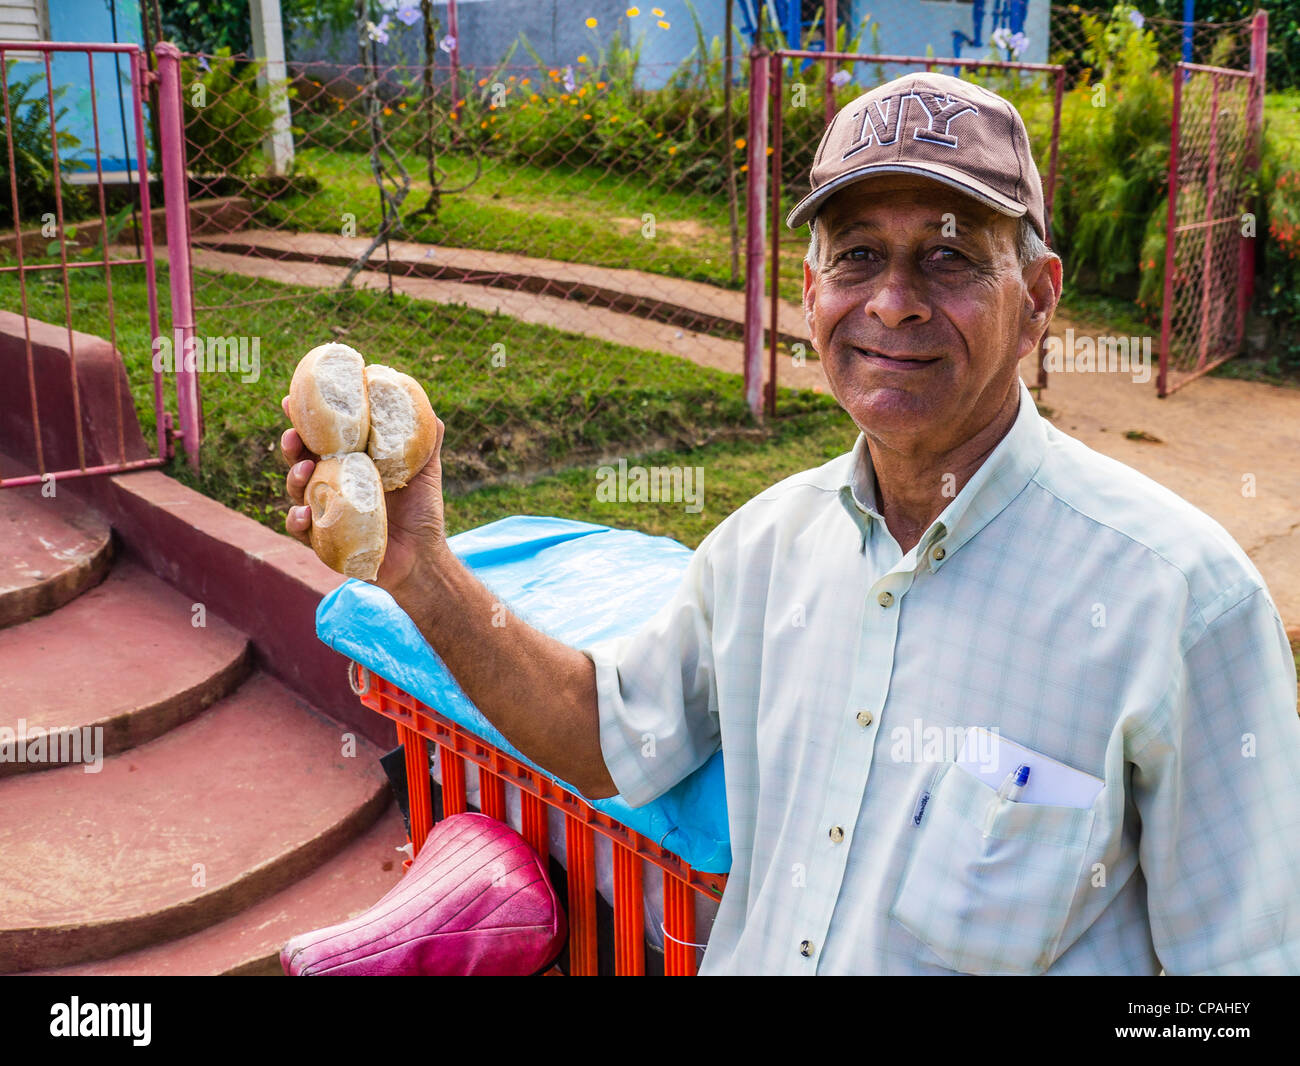 A 50-60 year old Cuban Hispanic bread vendor holds three freshly baked rolls in his hand as he delivers them in Viñales, Cuba. Stock Photo